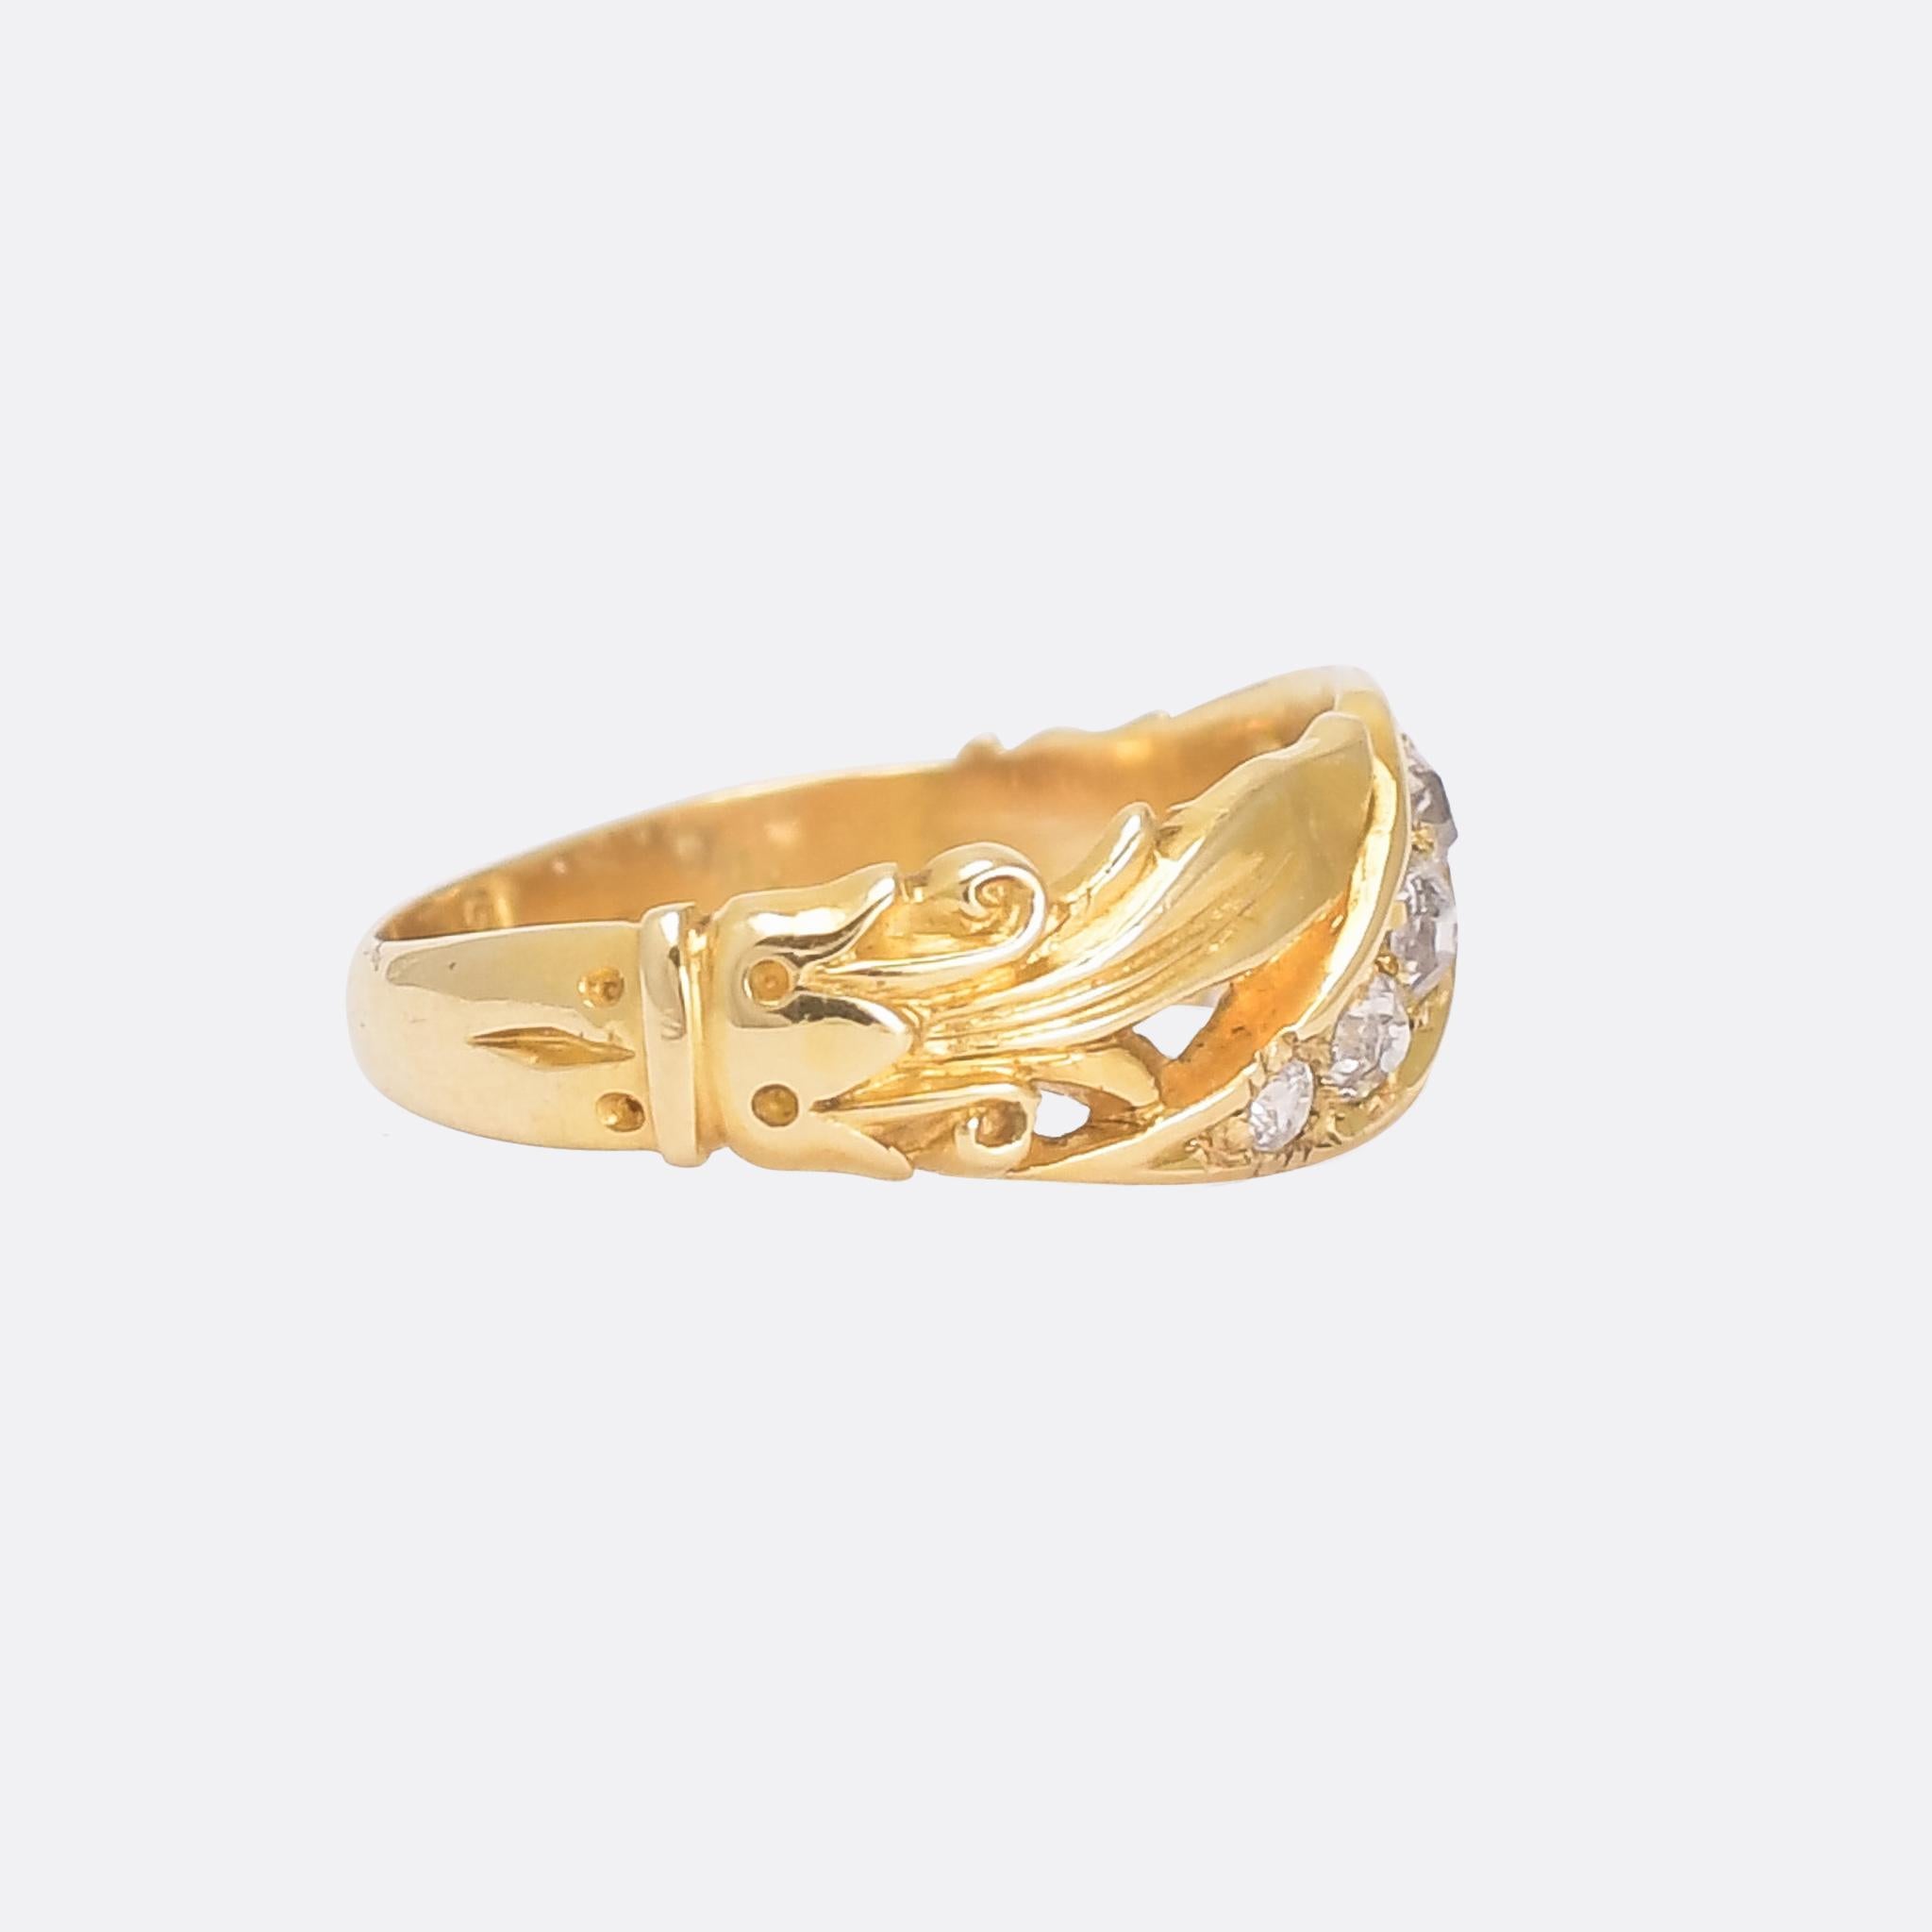 A gorgeous mid Victorian diamond band dating from 1874. The diamonds are set diagonally across the band, and flanked by hand carved scroll and foilate motifs. It's modelled in 18 karat gold, ideal for stacking but interesting enough to be worn on